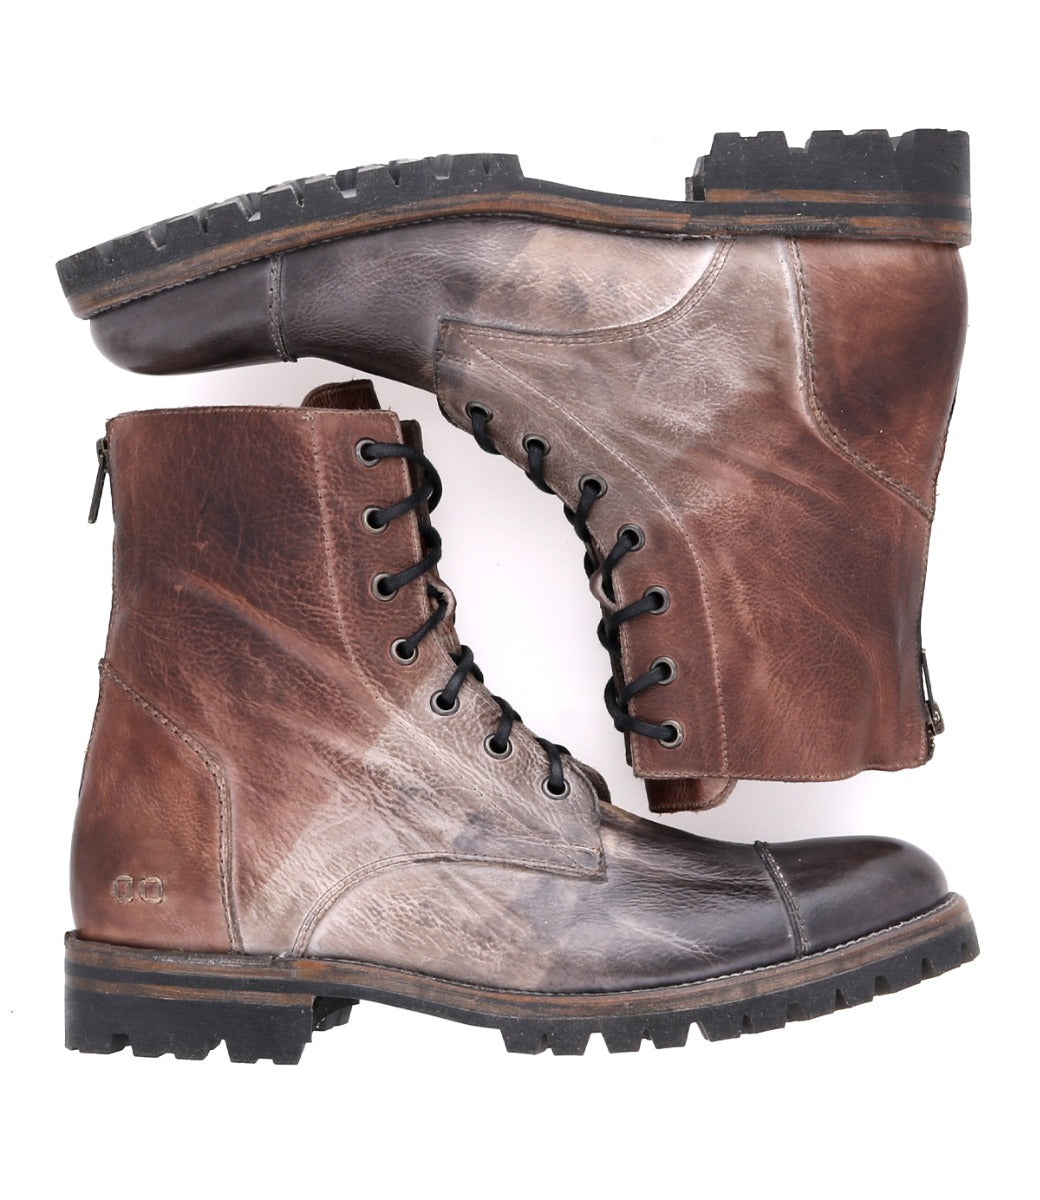 A pair of Bed Stu Protege Trek men's brown leather boots on a white background.